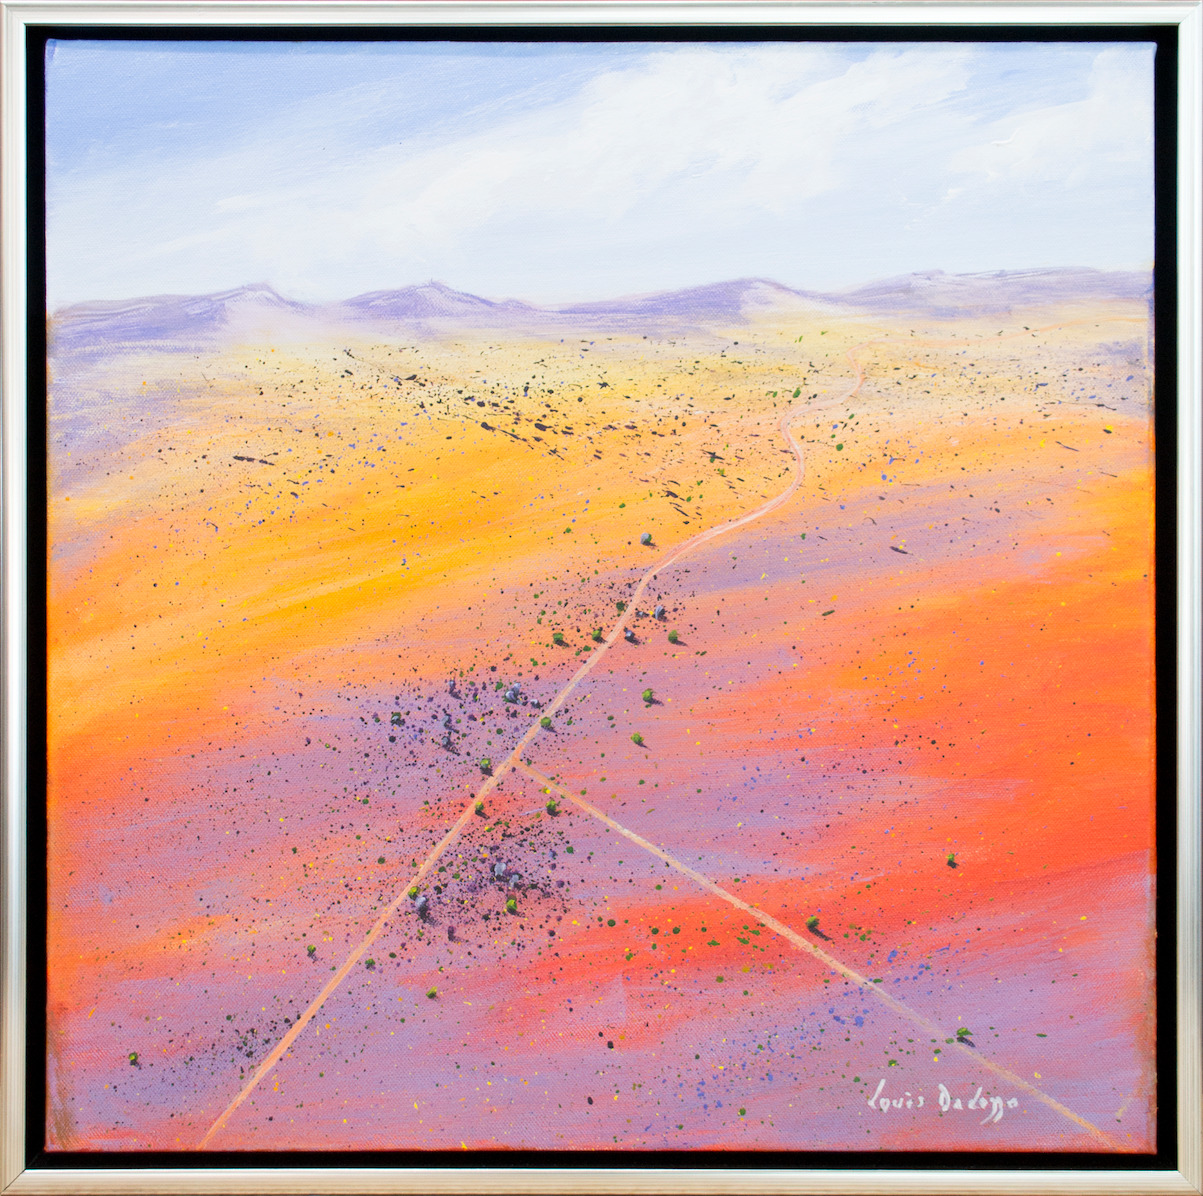 Framed Front View Of Landscape Painting "Towards The Breakaways Study" By Louis Dalozzo